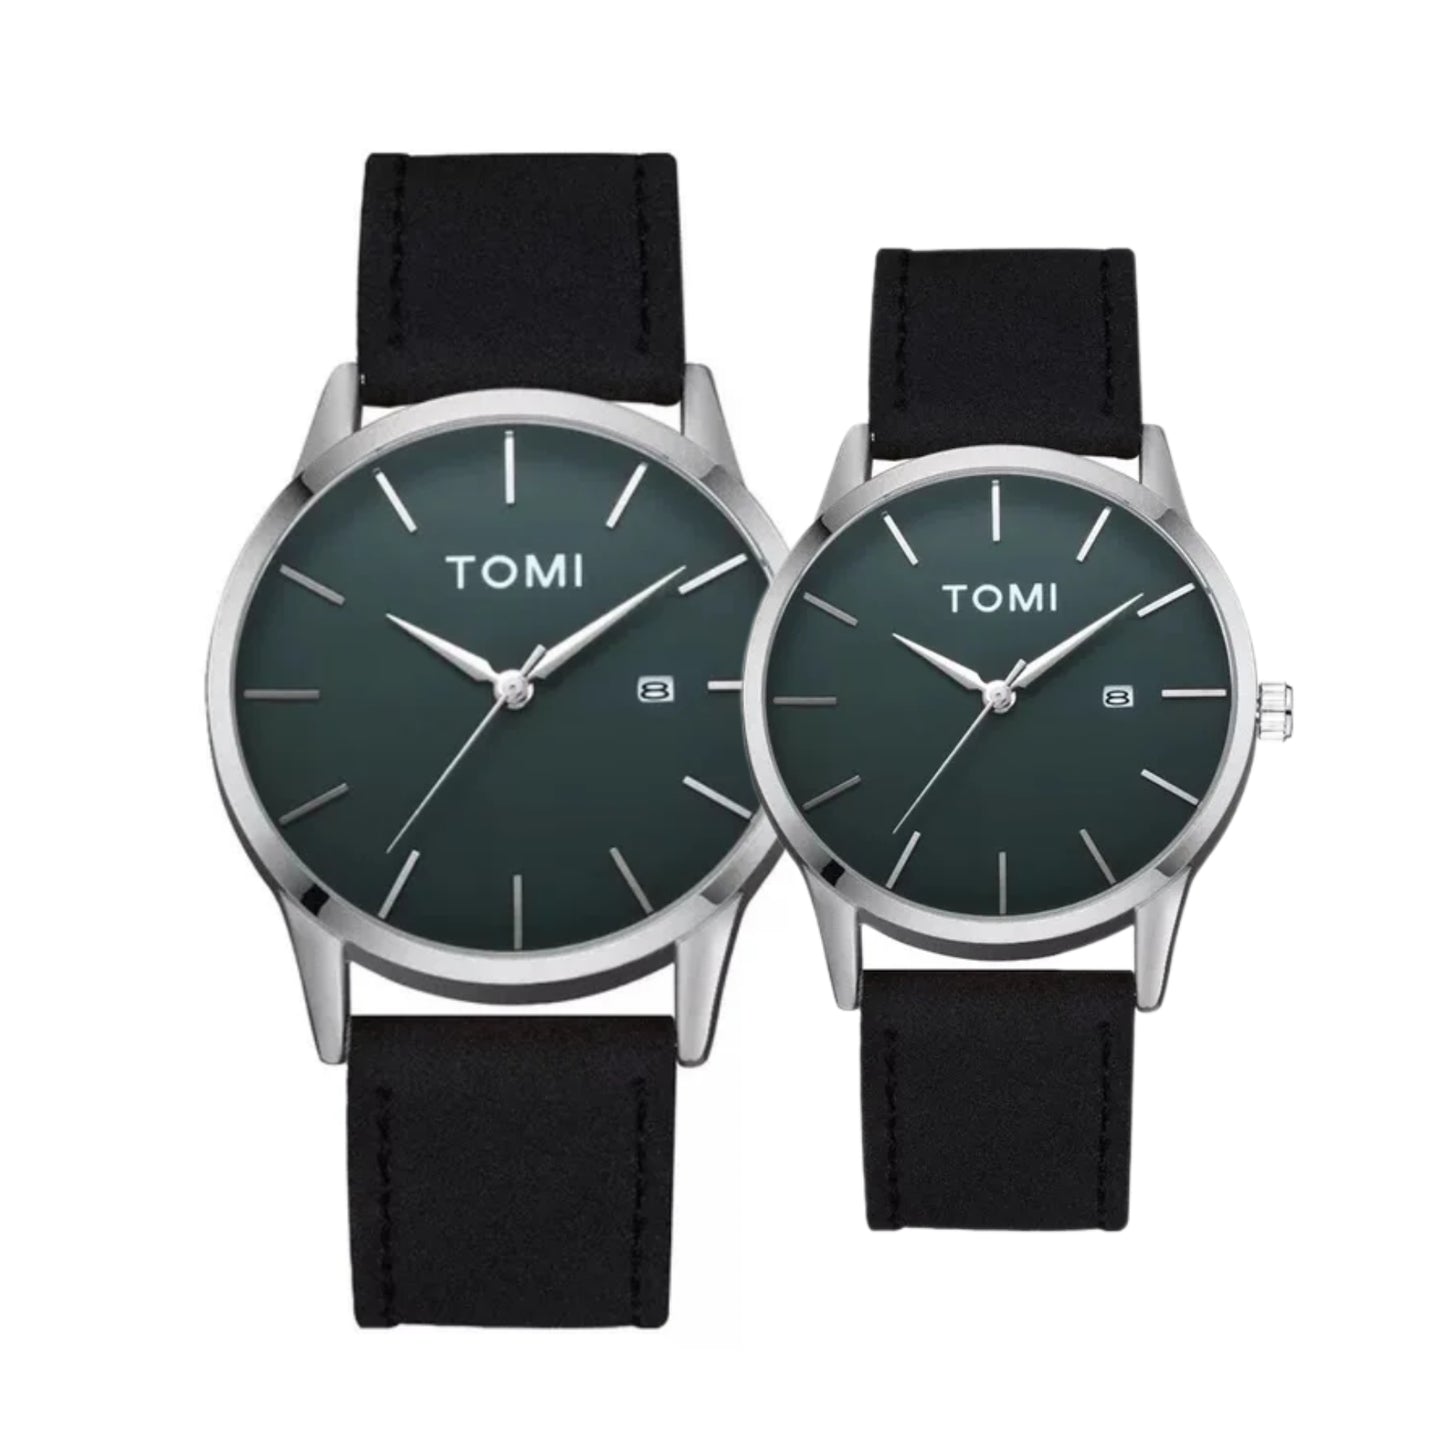 TOMI T-071 Couple Watch Date Quartz Leather Strapa